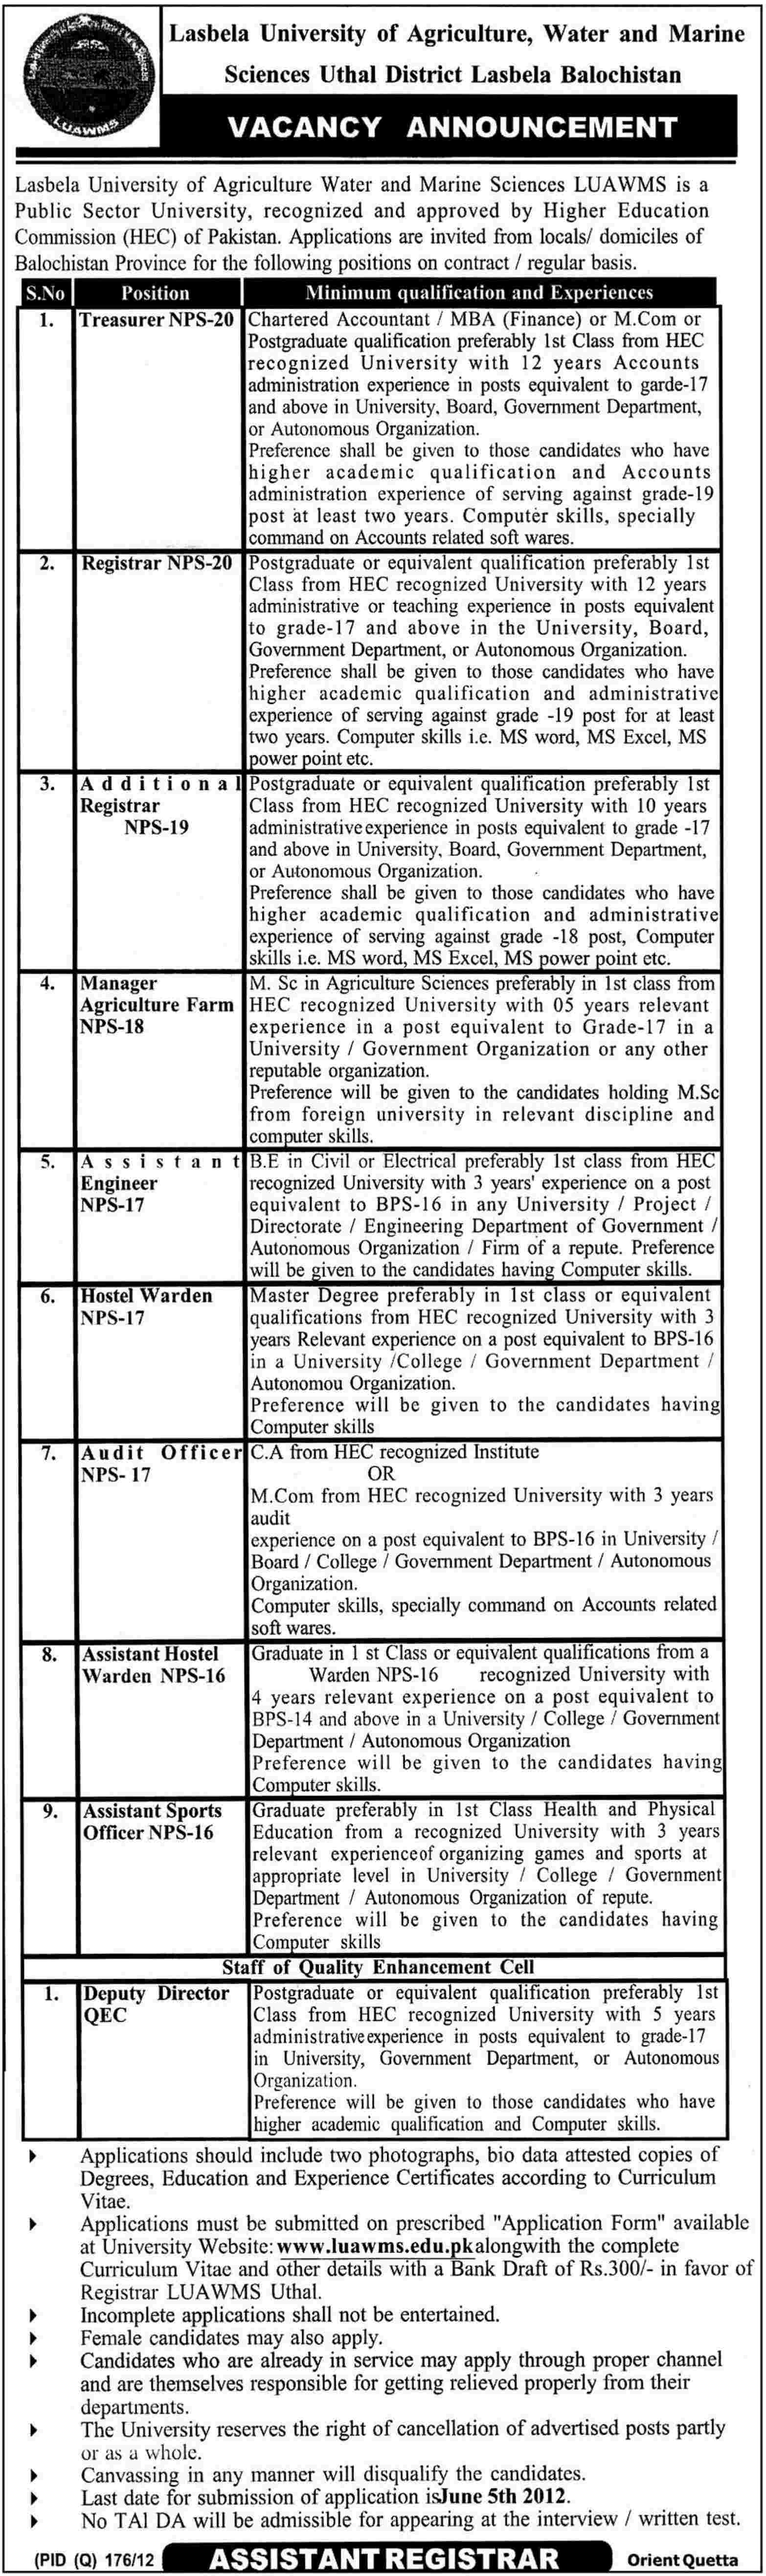 Administrative Jobs at Lasbela University of Agriculture, Water and Marine Sciences